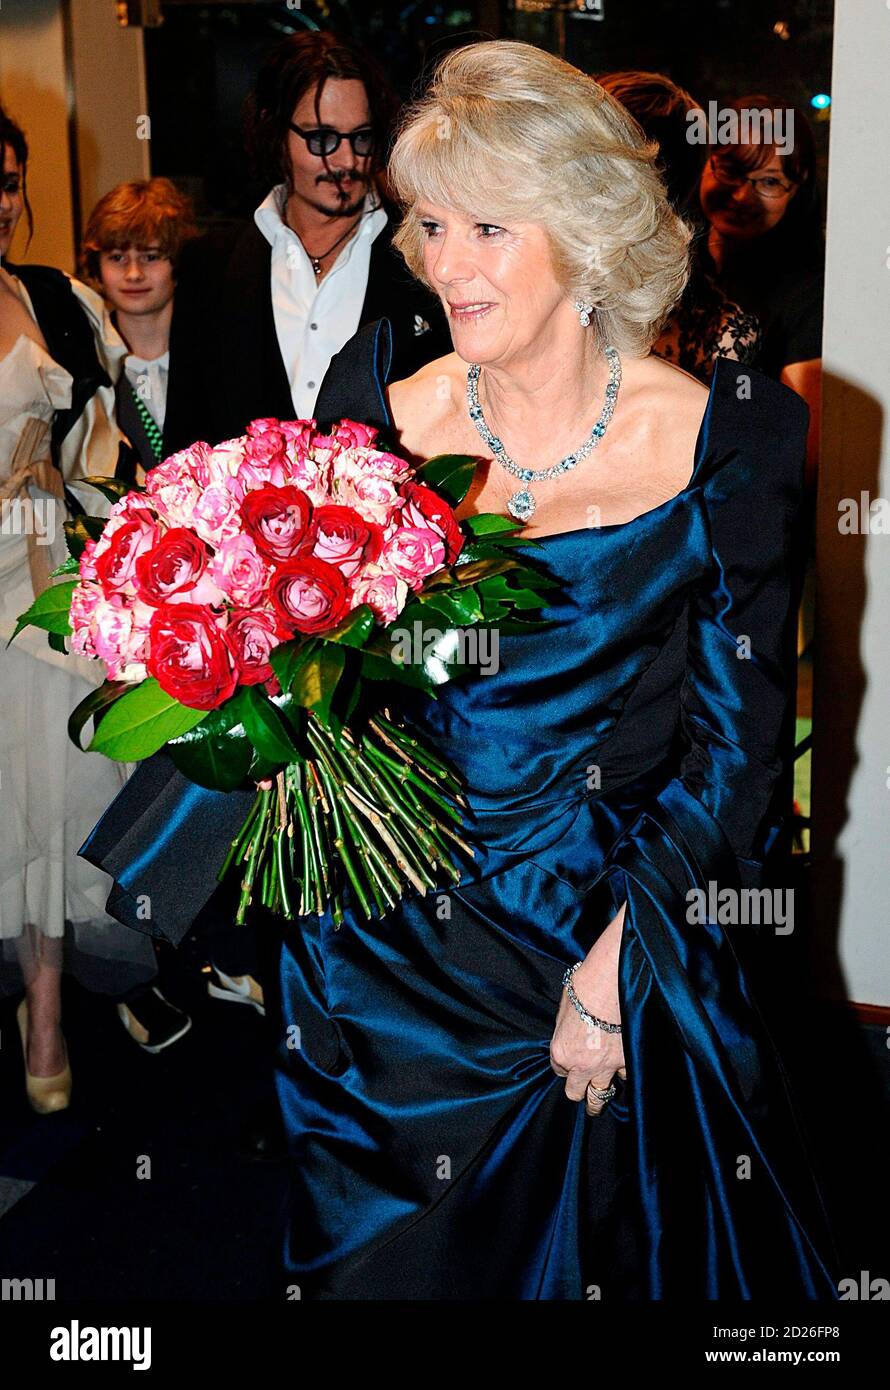 britains-camilla-duchess-of-cornwall-receives-a-bouquet-of-flowers-as-she-arrives-at-the-royal-world-premiere-of-alice-in-wonderland-in-london-february-25-2010-reutersian-westpool-britain-tags-entertainment-royals-2D26FP8.jpg